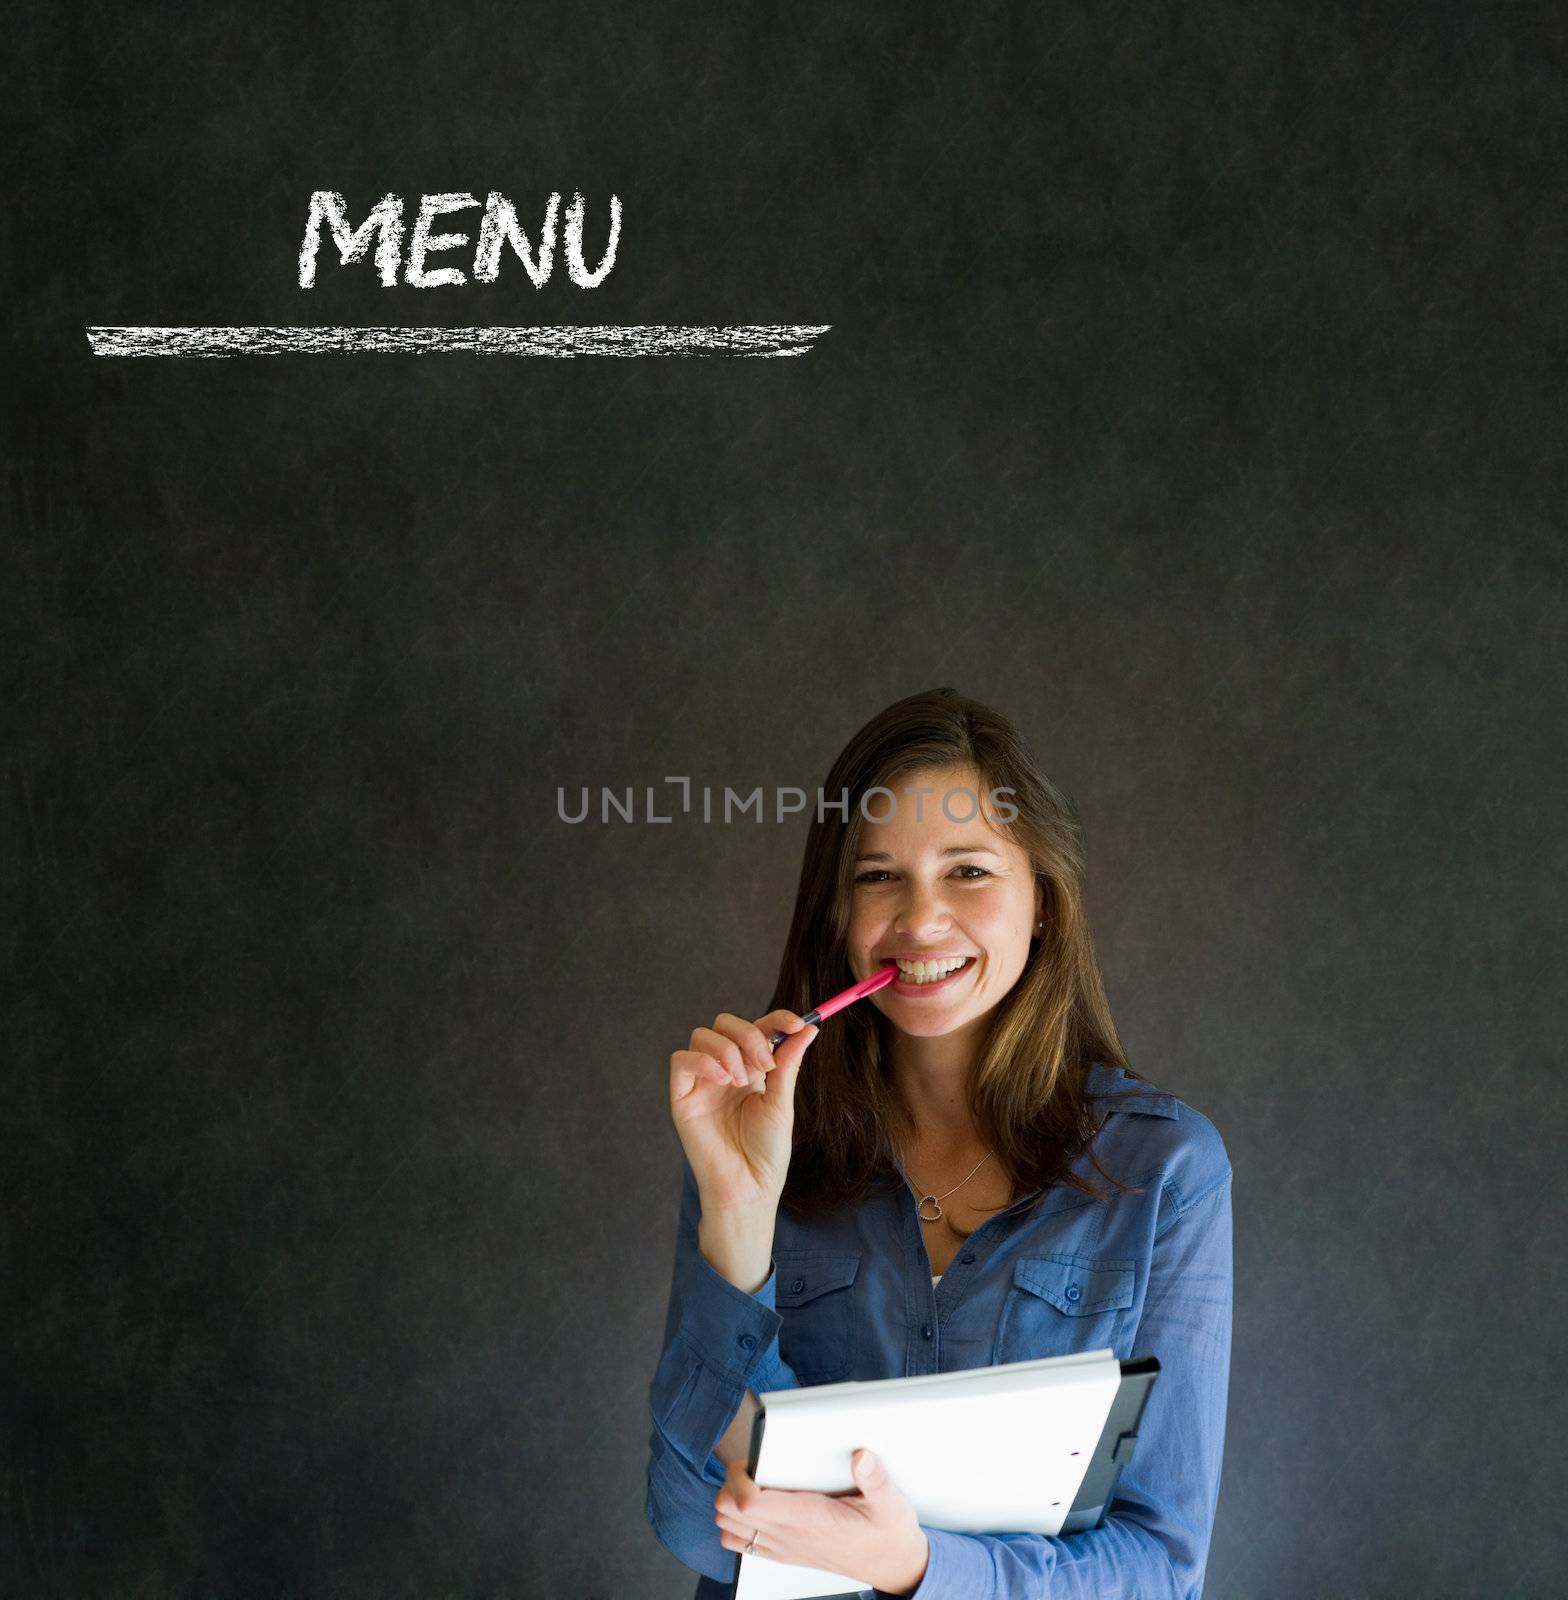 Businesswoman, restaurant owner or chef with chalk menu by alistaircotton